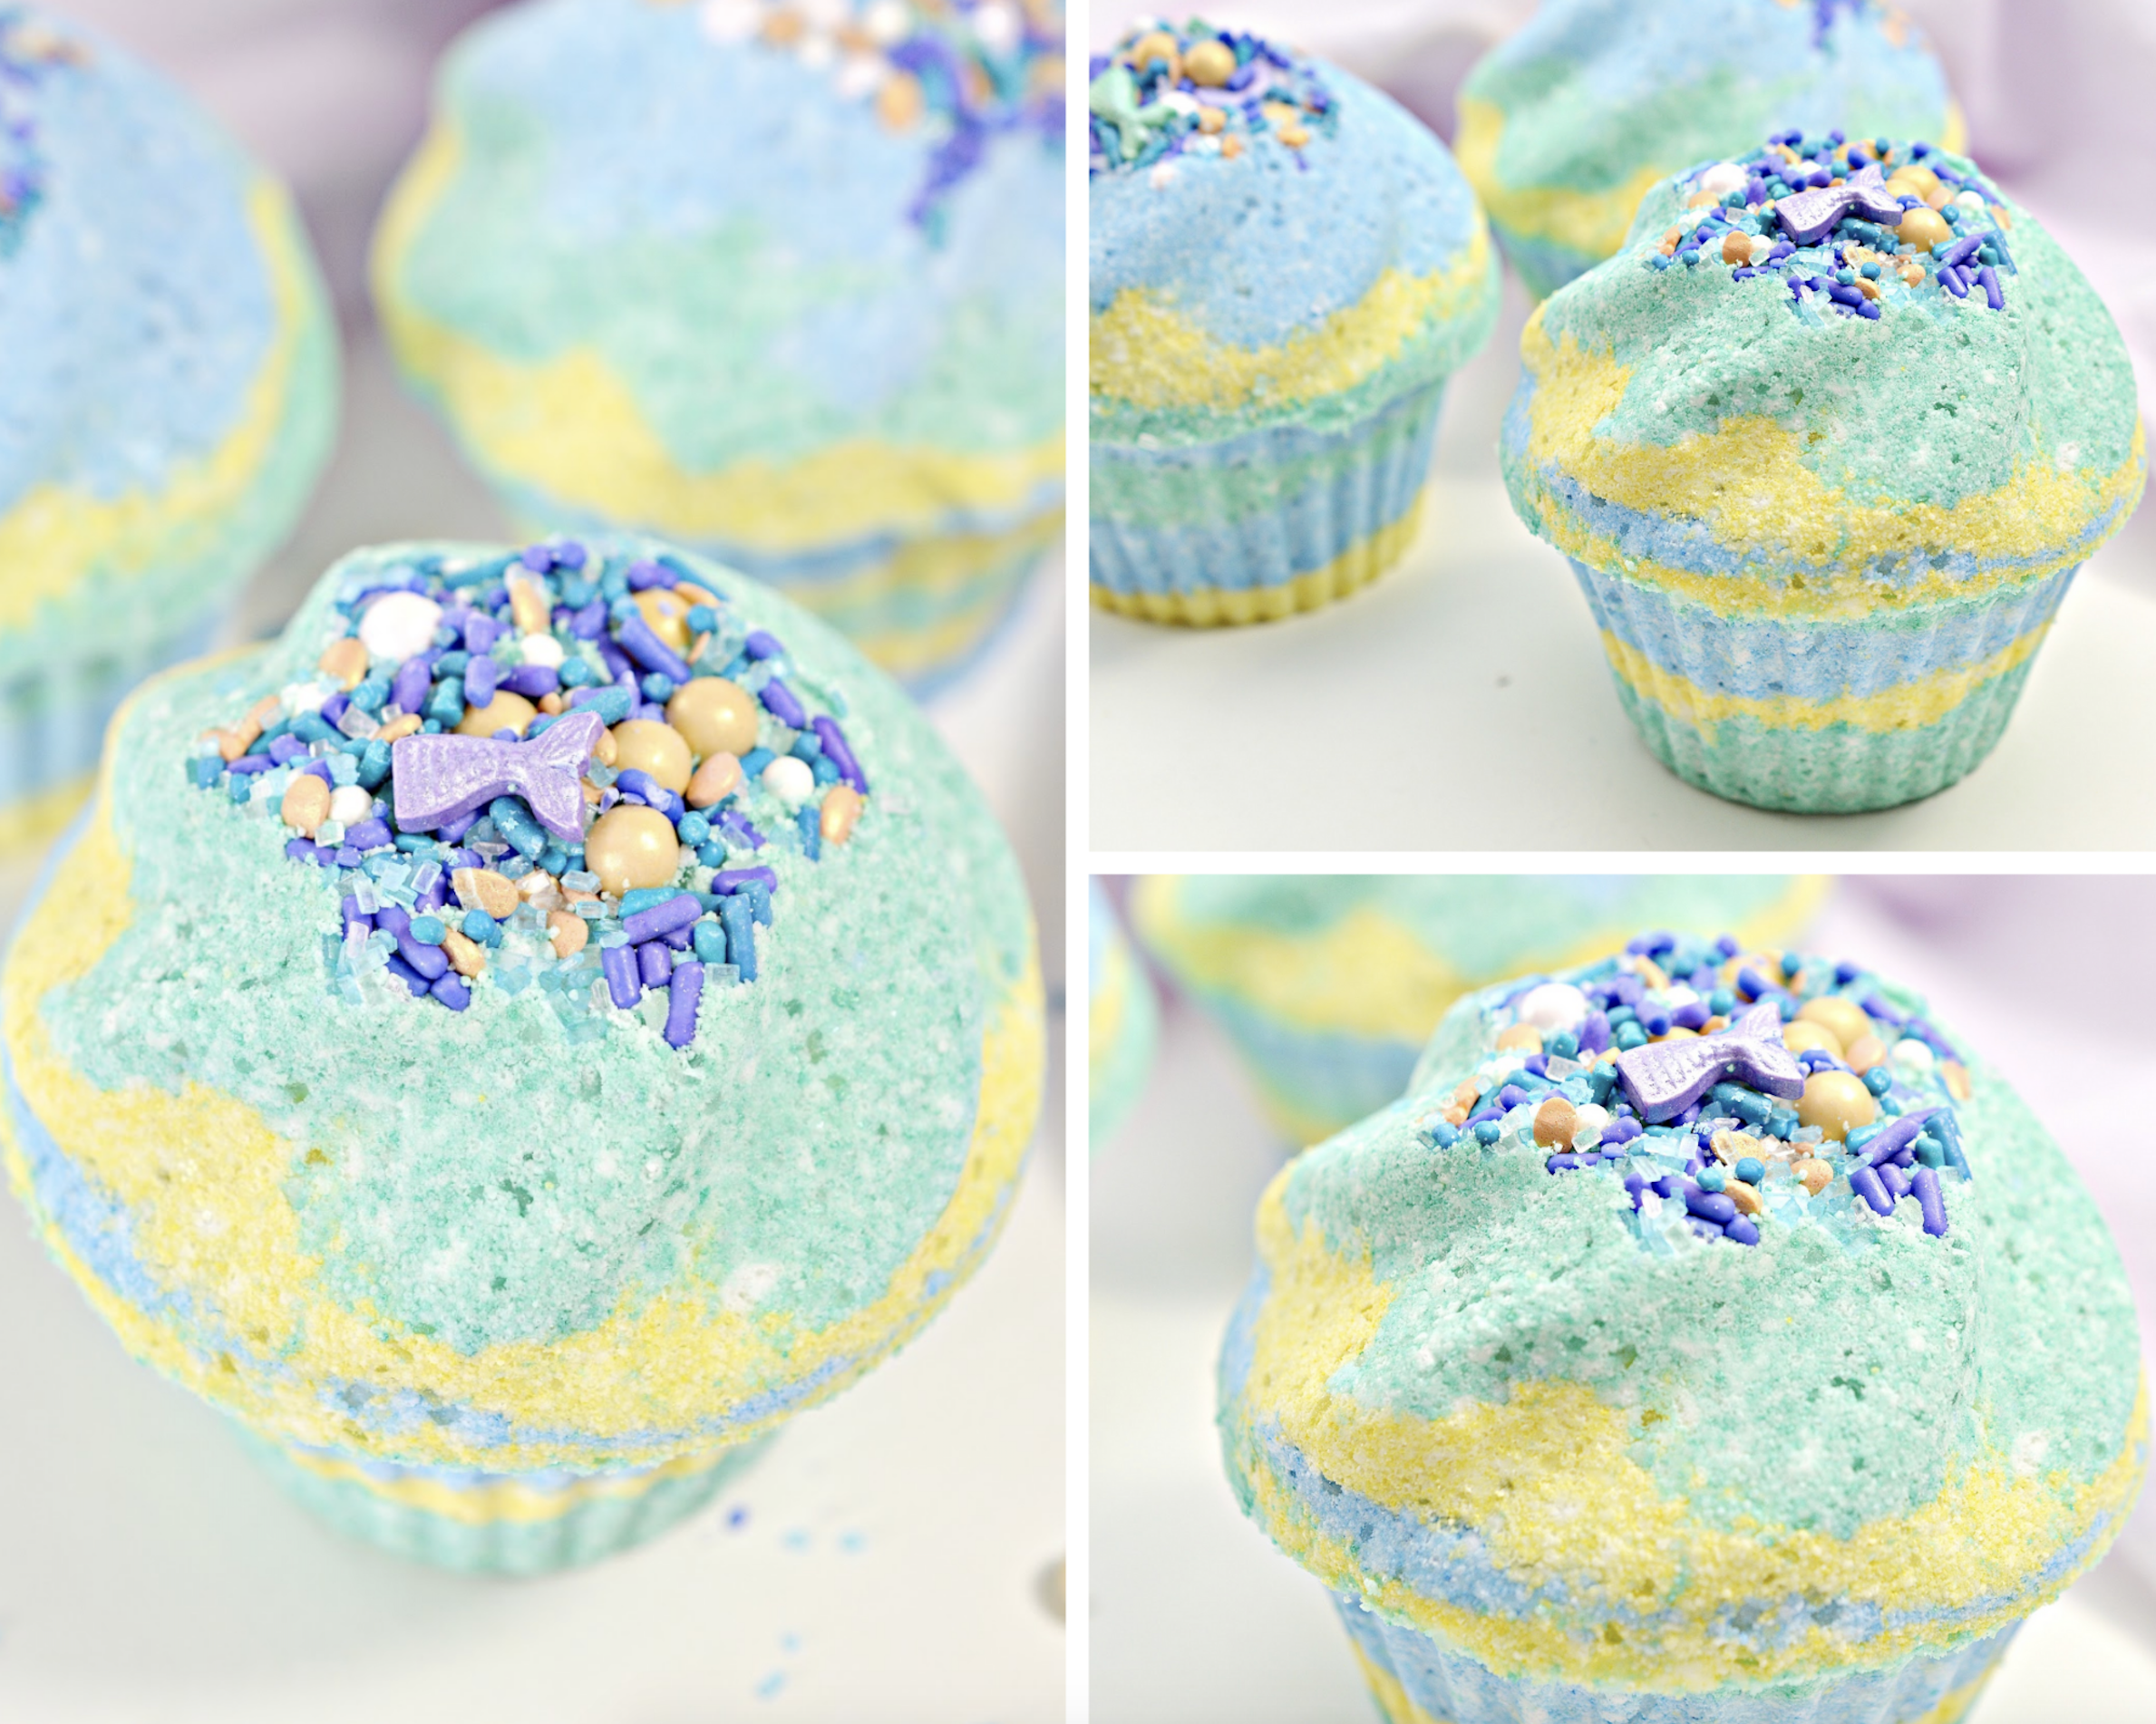 Make your next bath smell wonderful, fizzy and more relaxing with DIY bath bombs! Try my recipe for Mermaid Cupcake Bath Bombs DIY! #bathbombs #DIY #bathcare #selfcare #DIYbathbombs #homemade #homemadebathbombs #beauty #beautyrecipes #skincarerecipes #imadethis #beautybloggers #beautyinfluencer #crafty #craftymoms